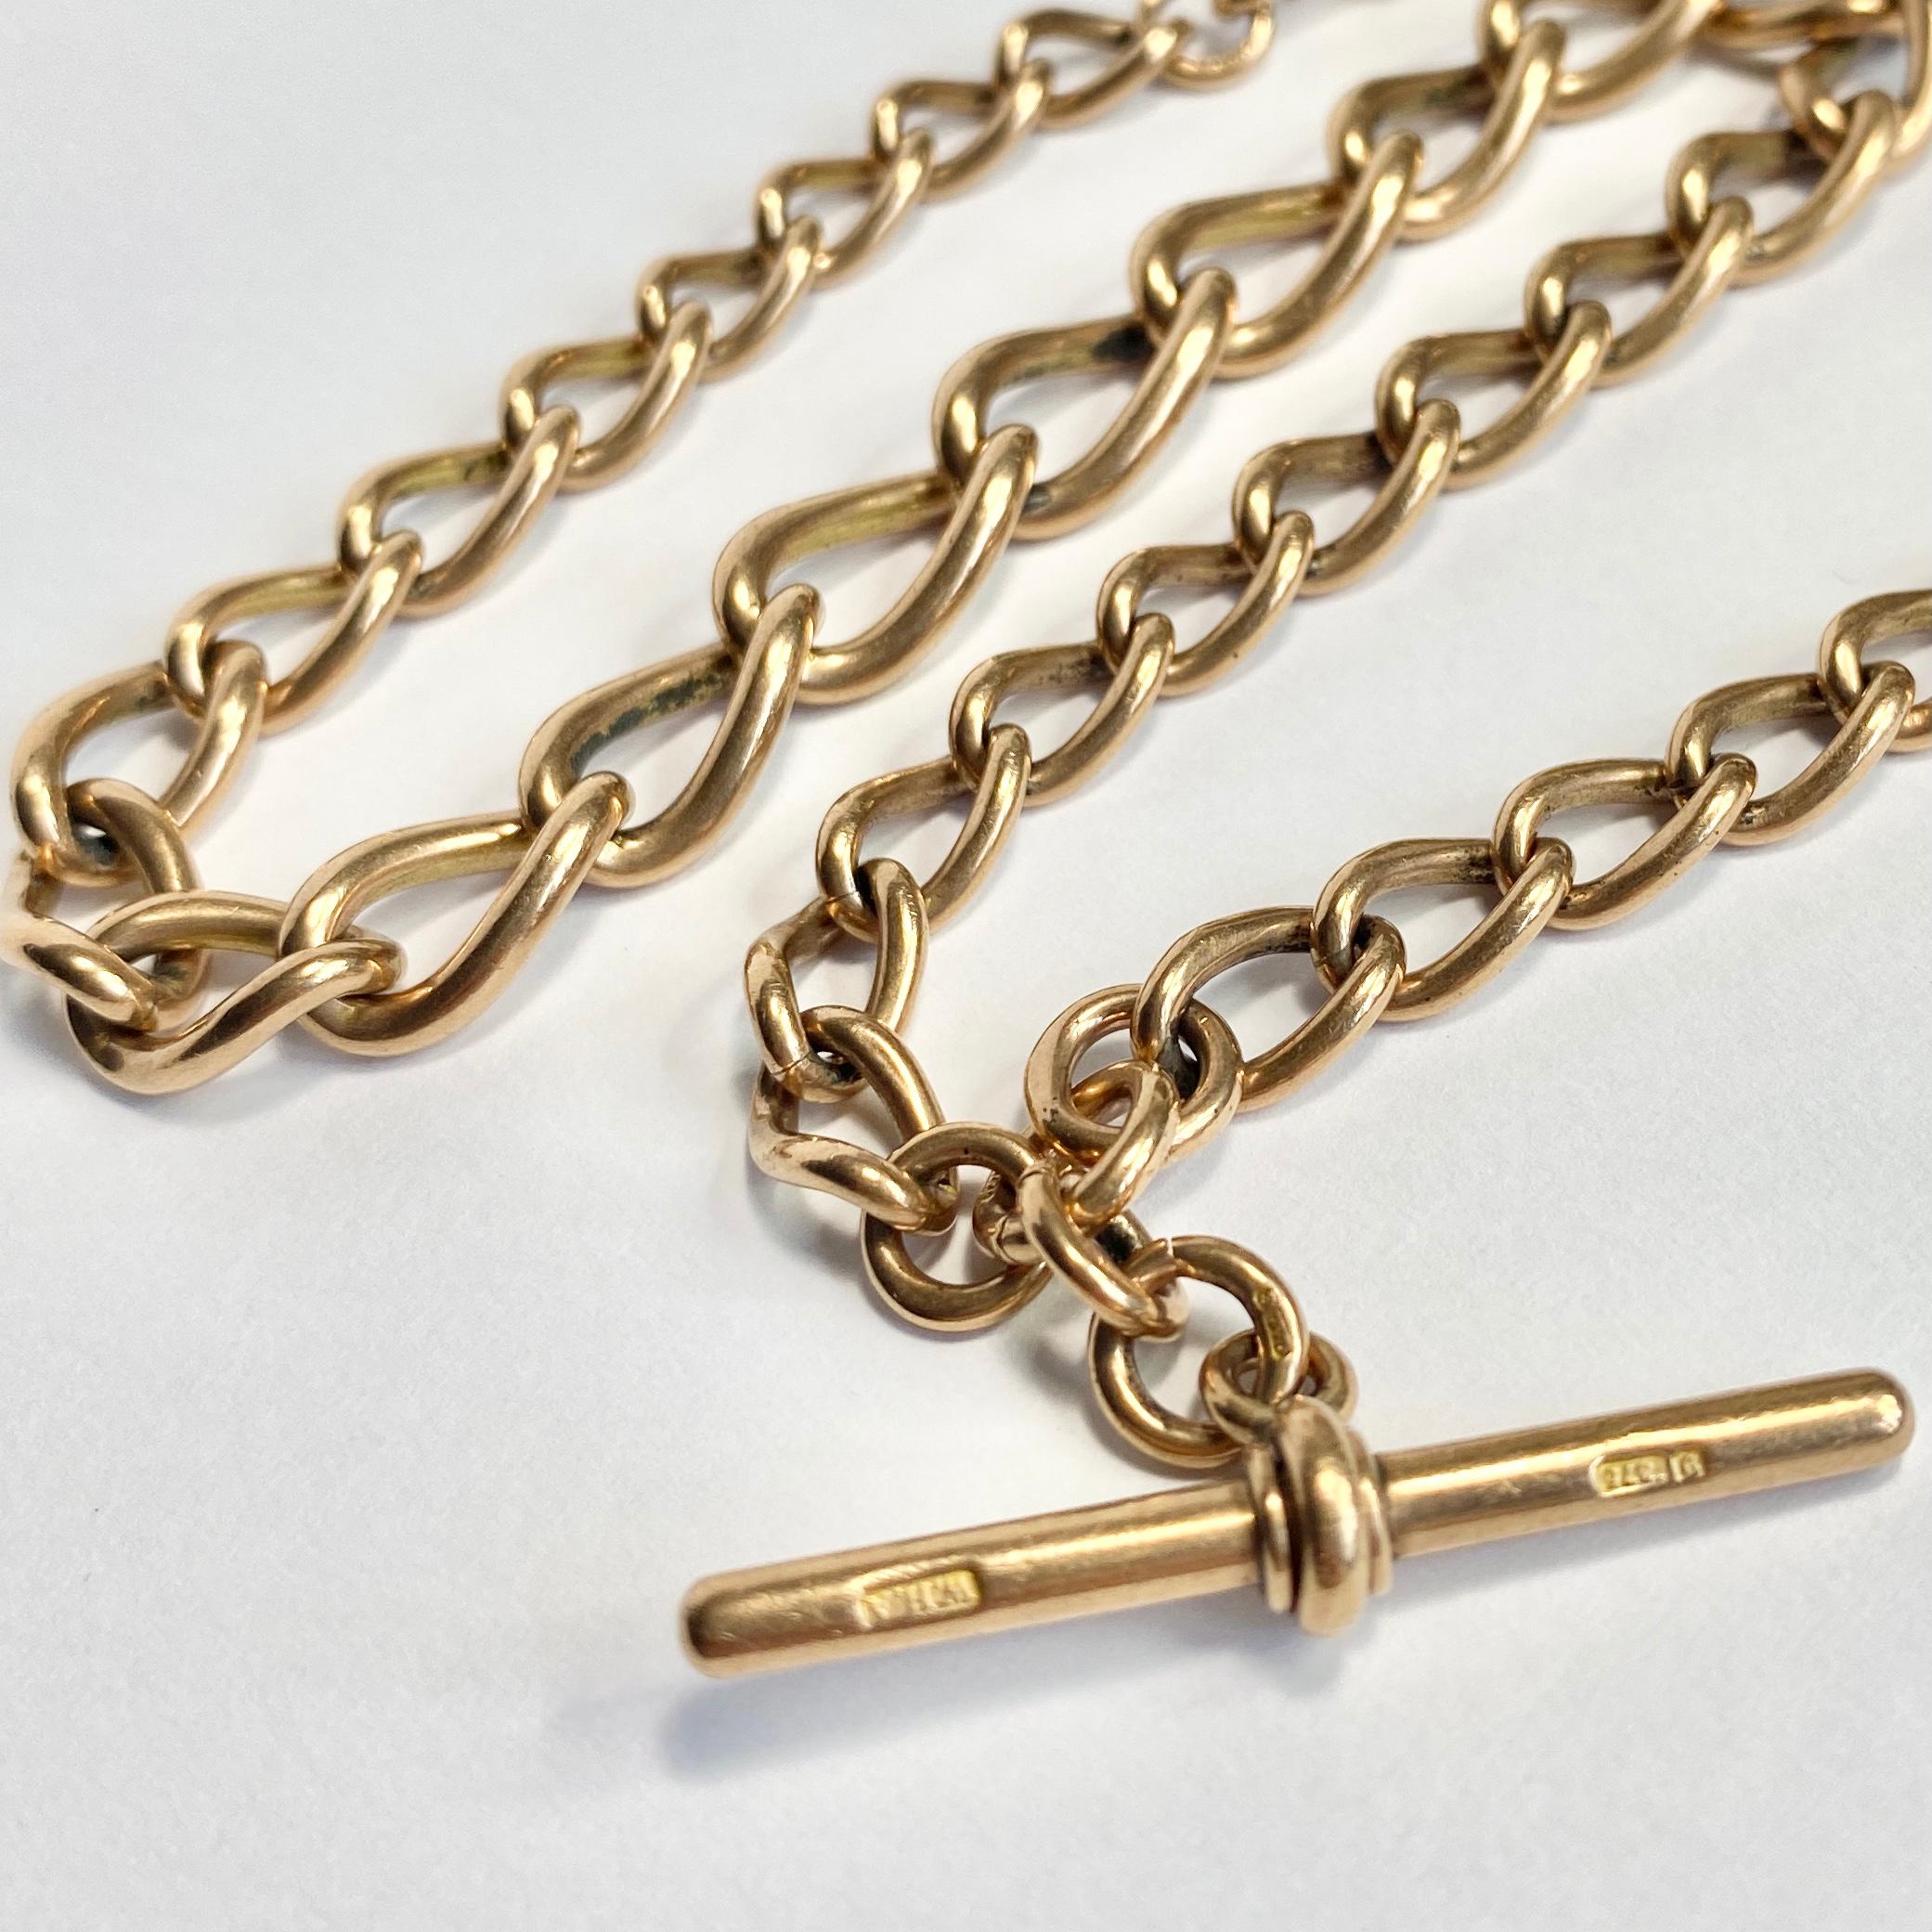 This chunky albert chain is made up of large links and can be worn as a necklace. On one end there is a dog clip and the other holds a spinning fob set with sardonyx and bloodstone. Modelled in 9ct rose gold. 

Length inc fob: 39.5cm 
Chain Width: